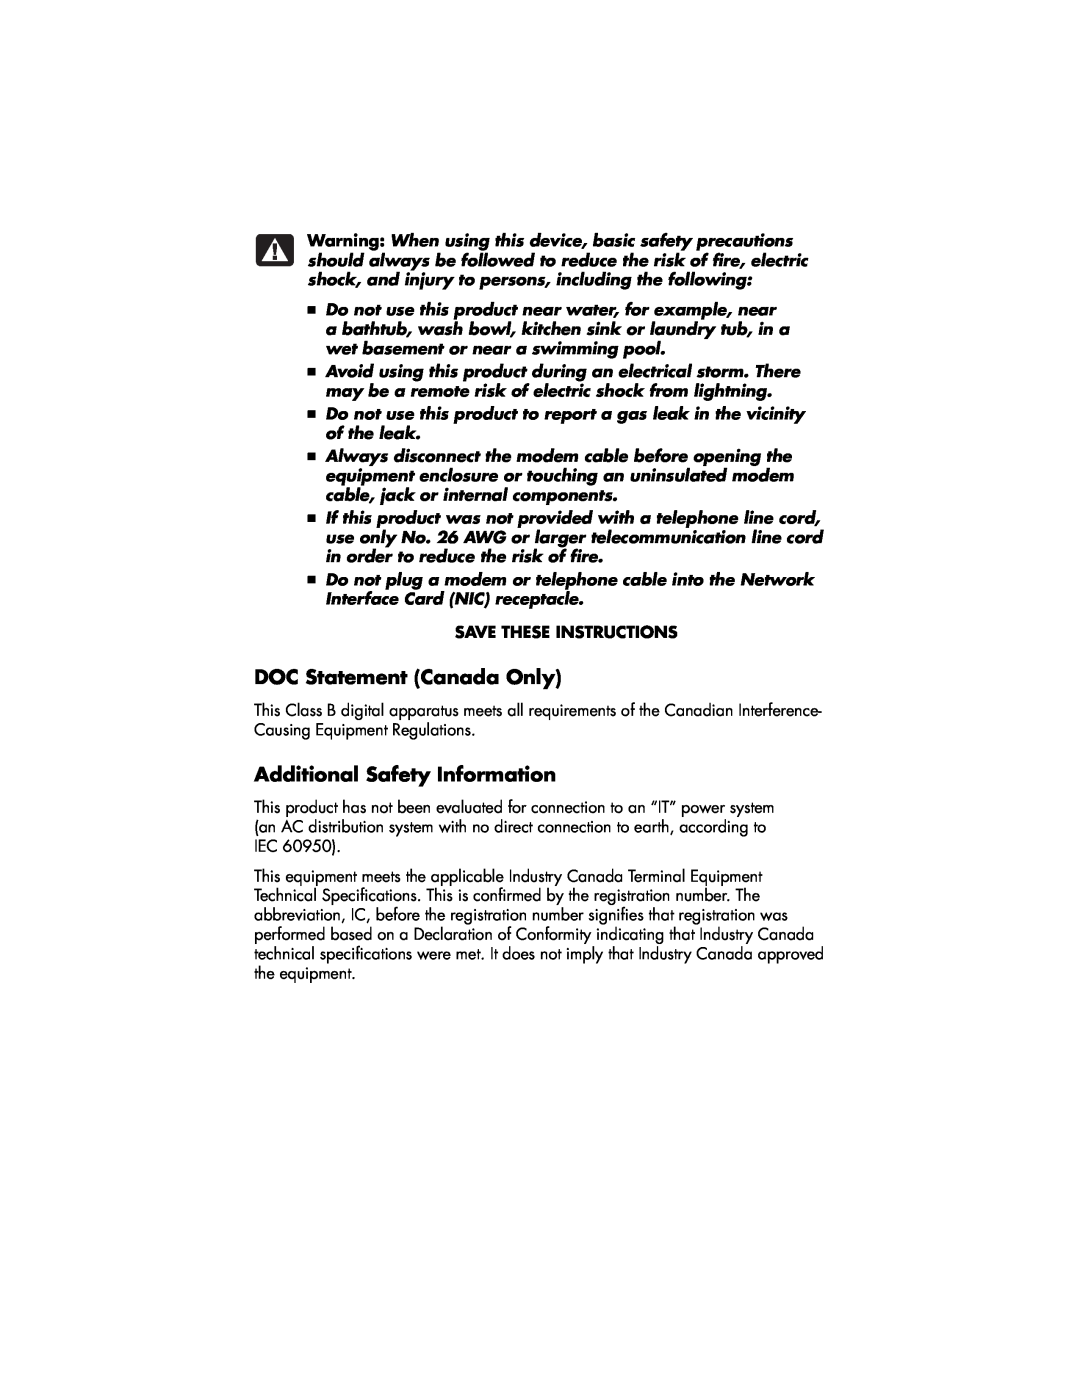 HP 525c (US/CAN), 735n (US/CAN) manual DOC Statement Canada Only, Additional Safety Information, Save These Instructions 